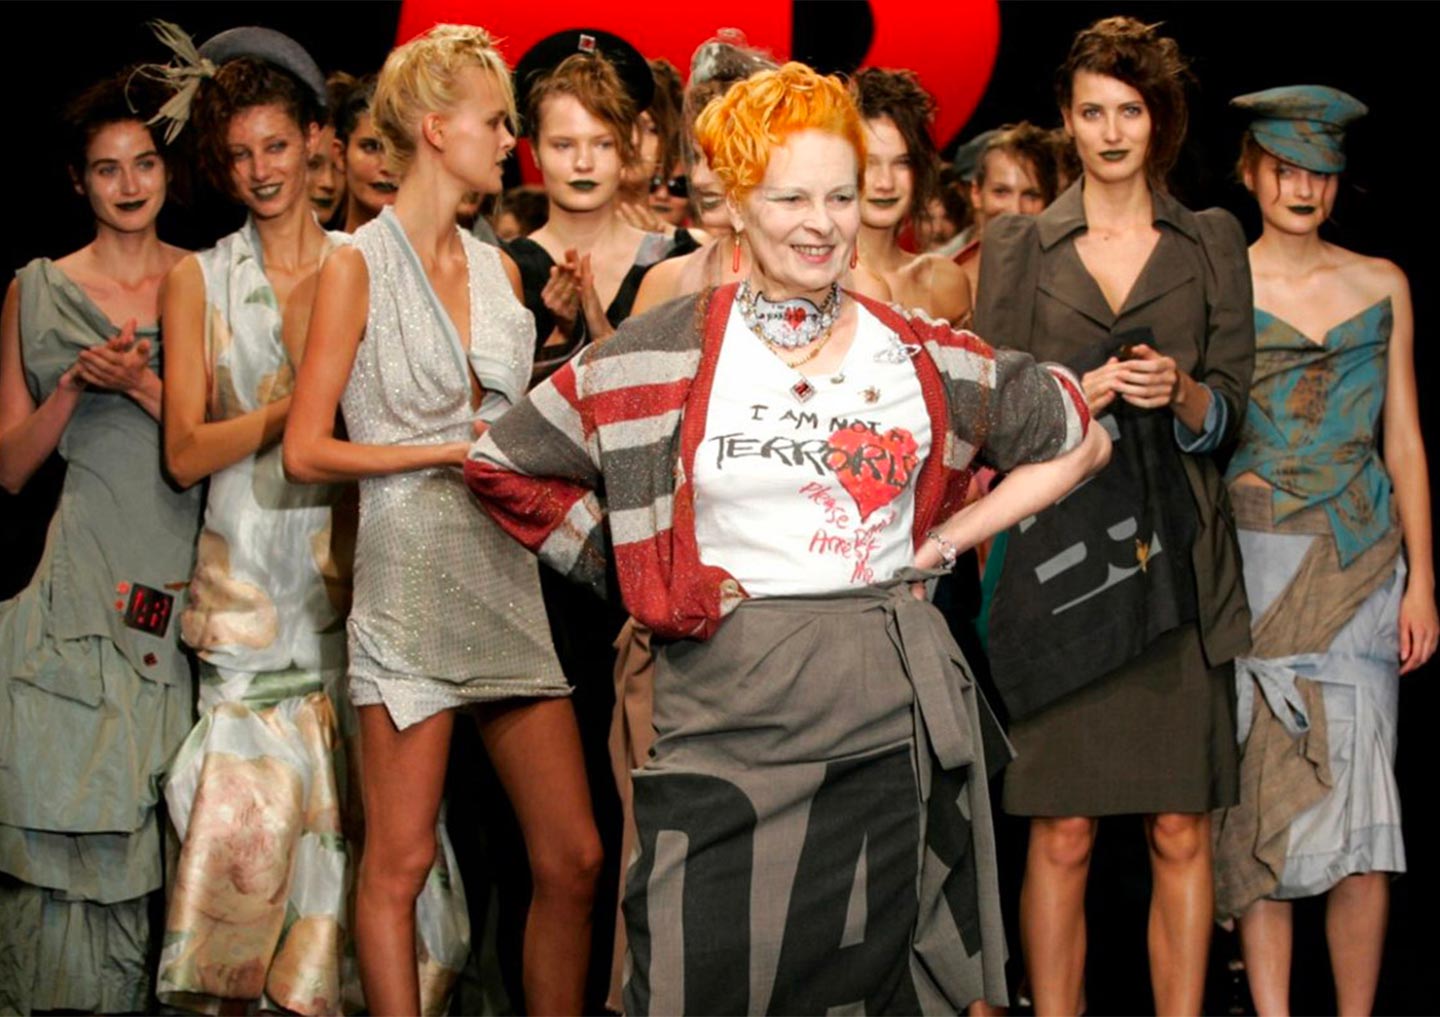 Throughout her career Vivienne Westwood linked fashion to politics, promoting environmental causes, nuclear disarmament, vegetarianism and efforts to fight climate change